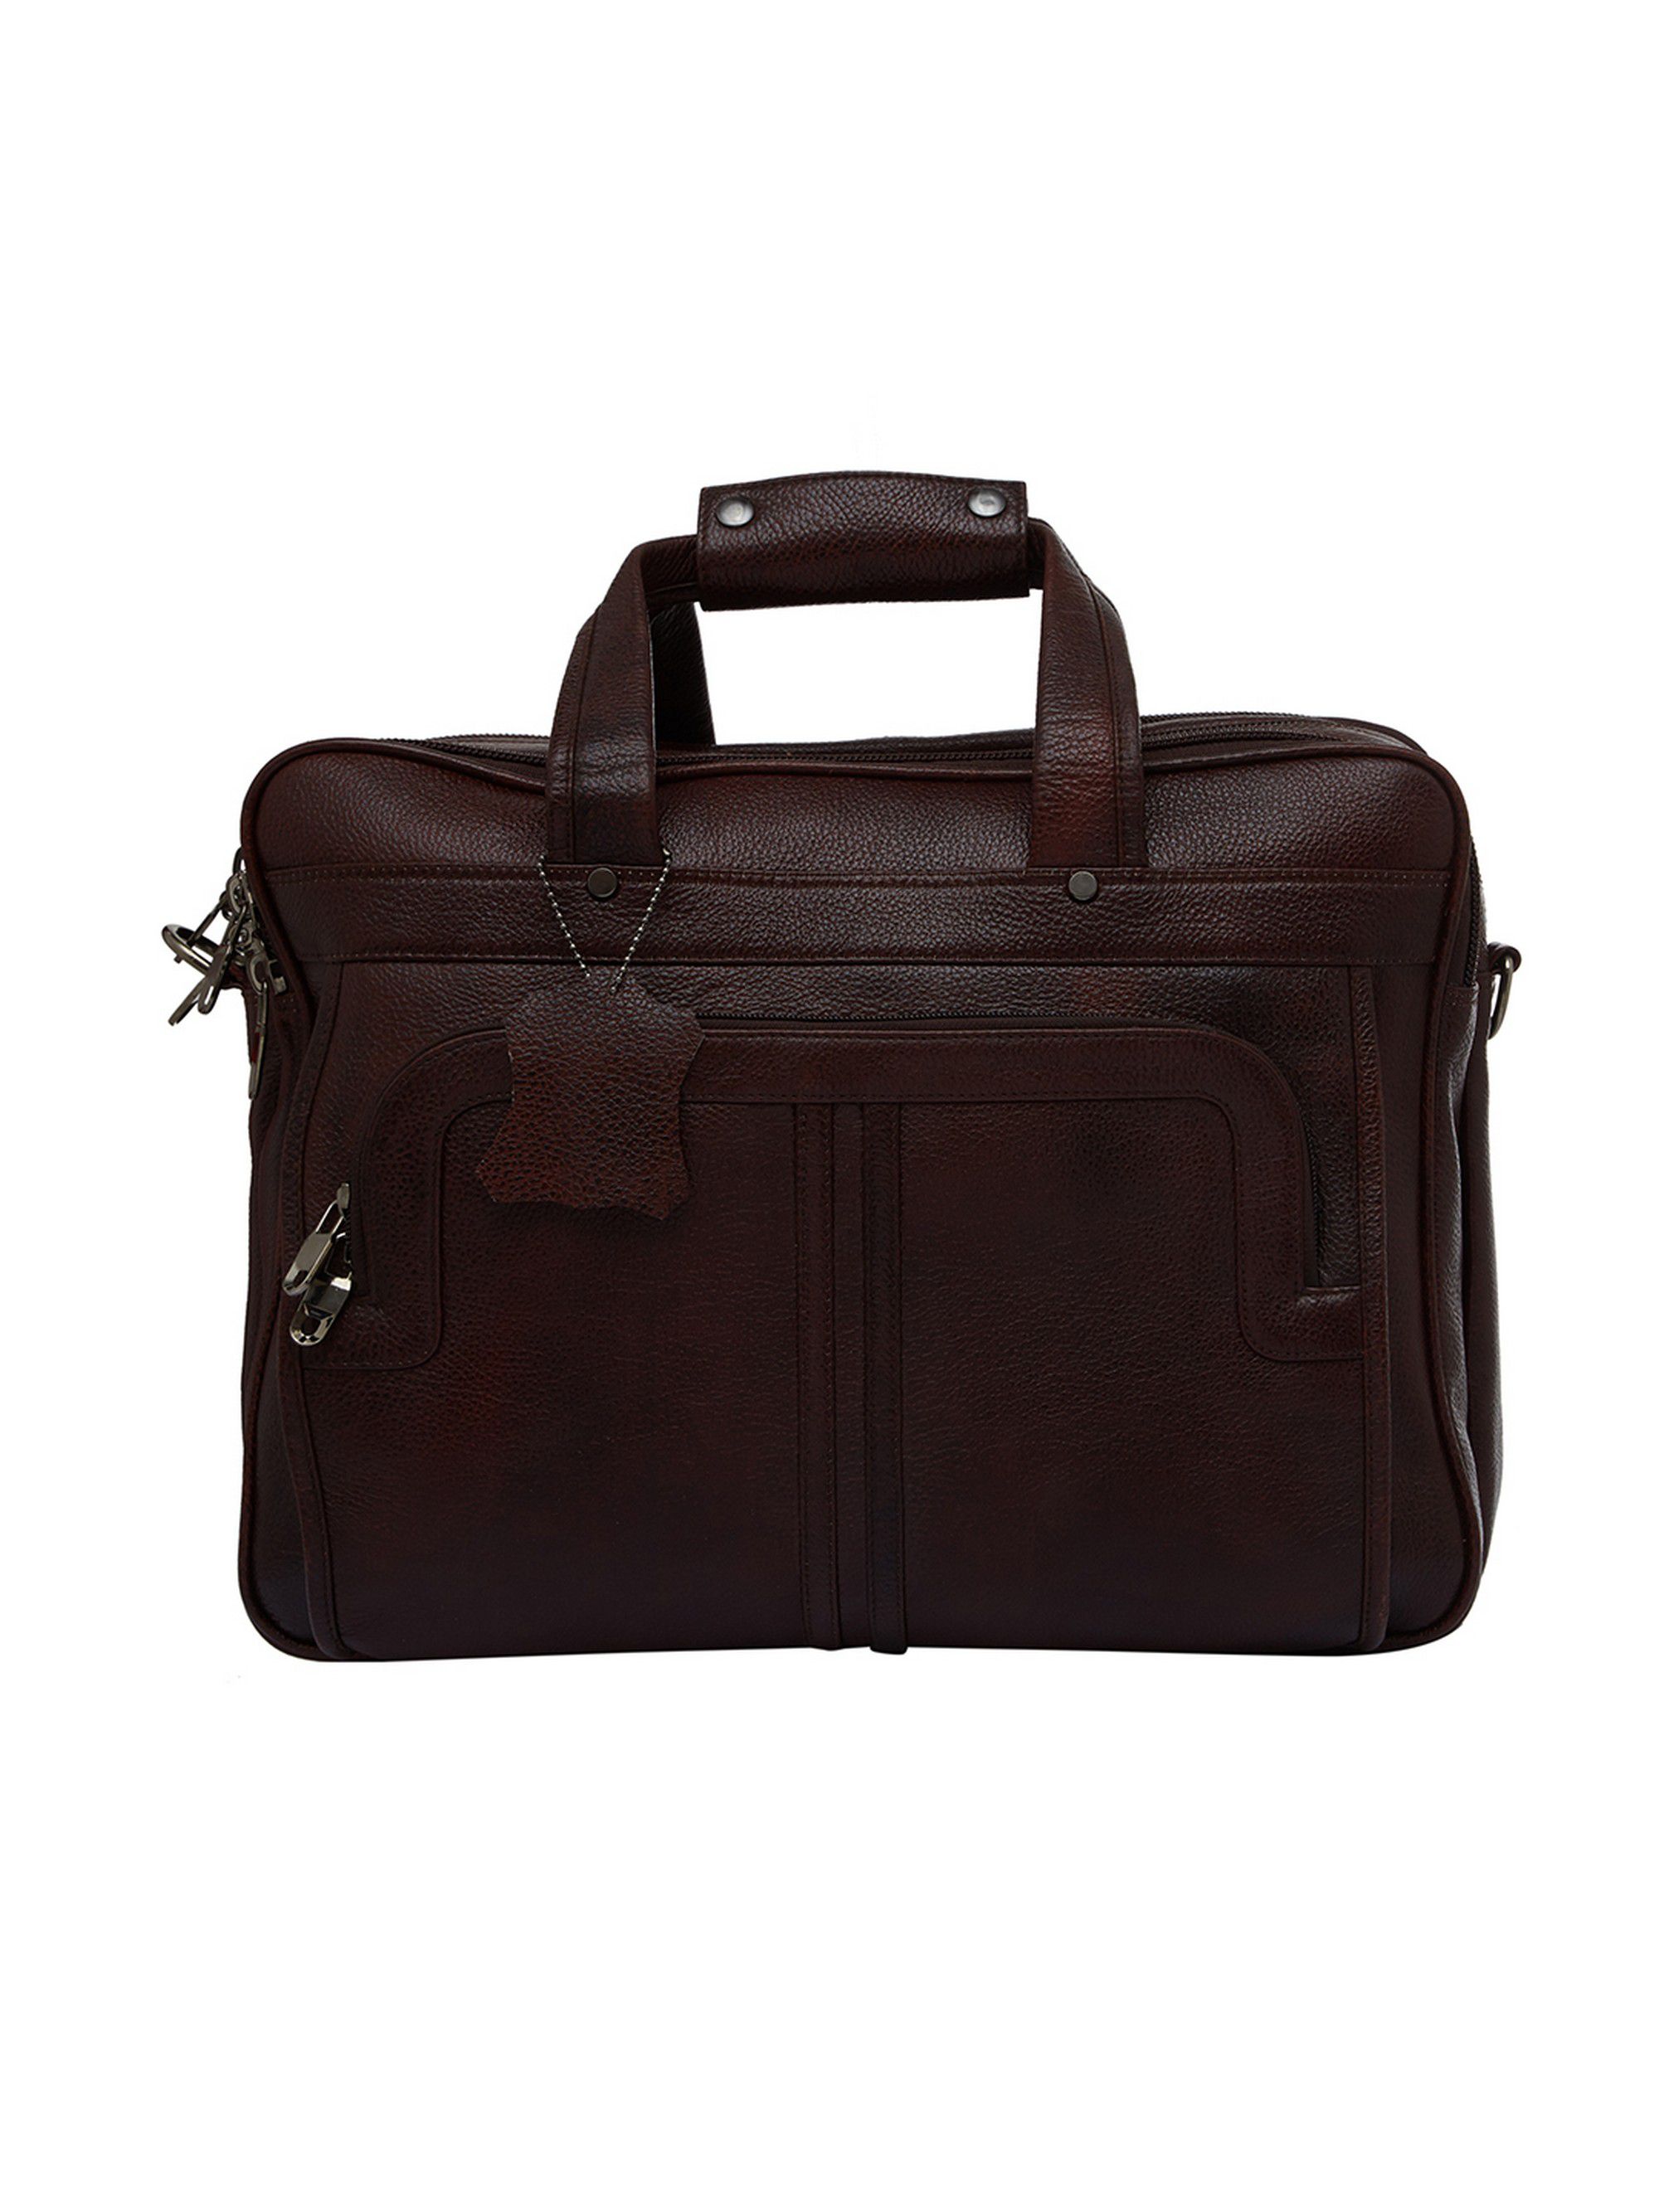 Leather World Office Bag Brown Leather Office Bag - Buy Leather World ...